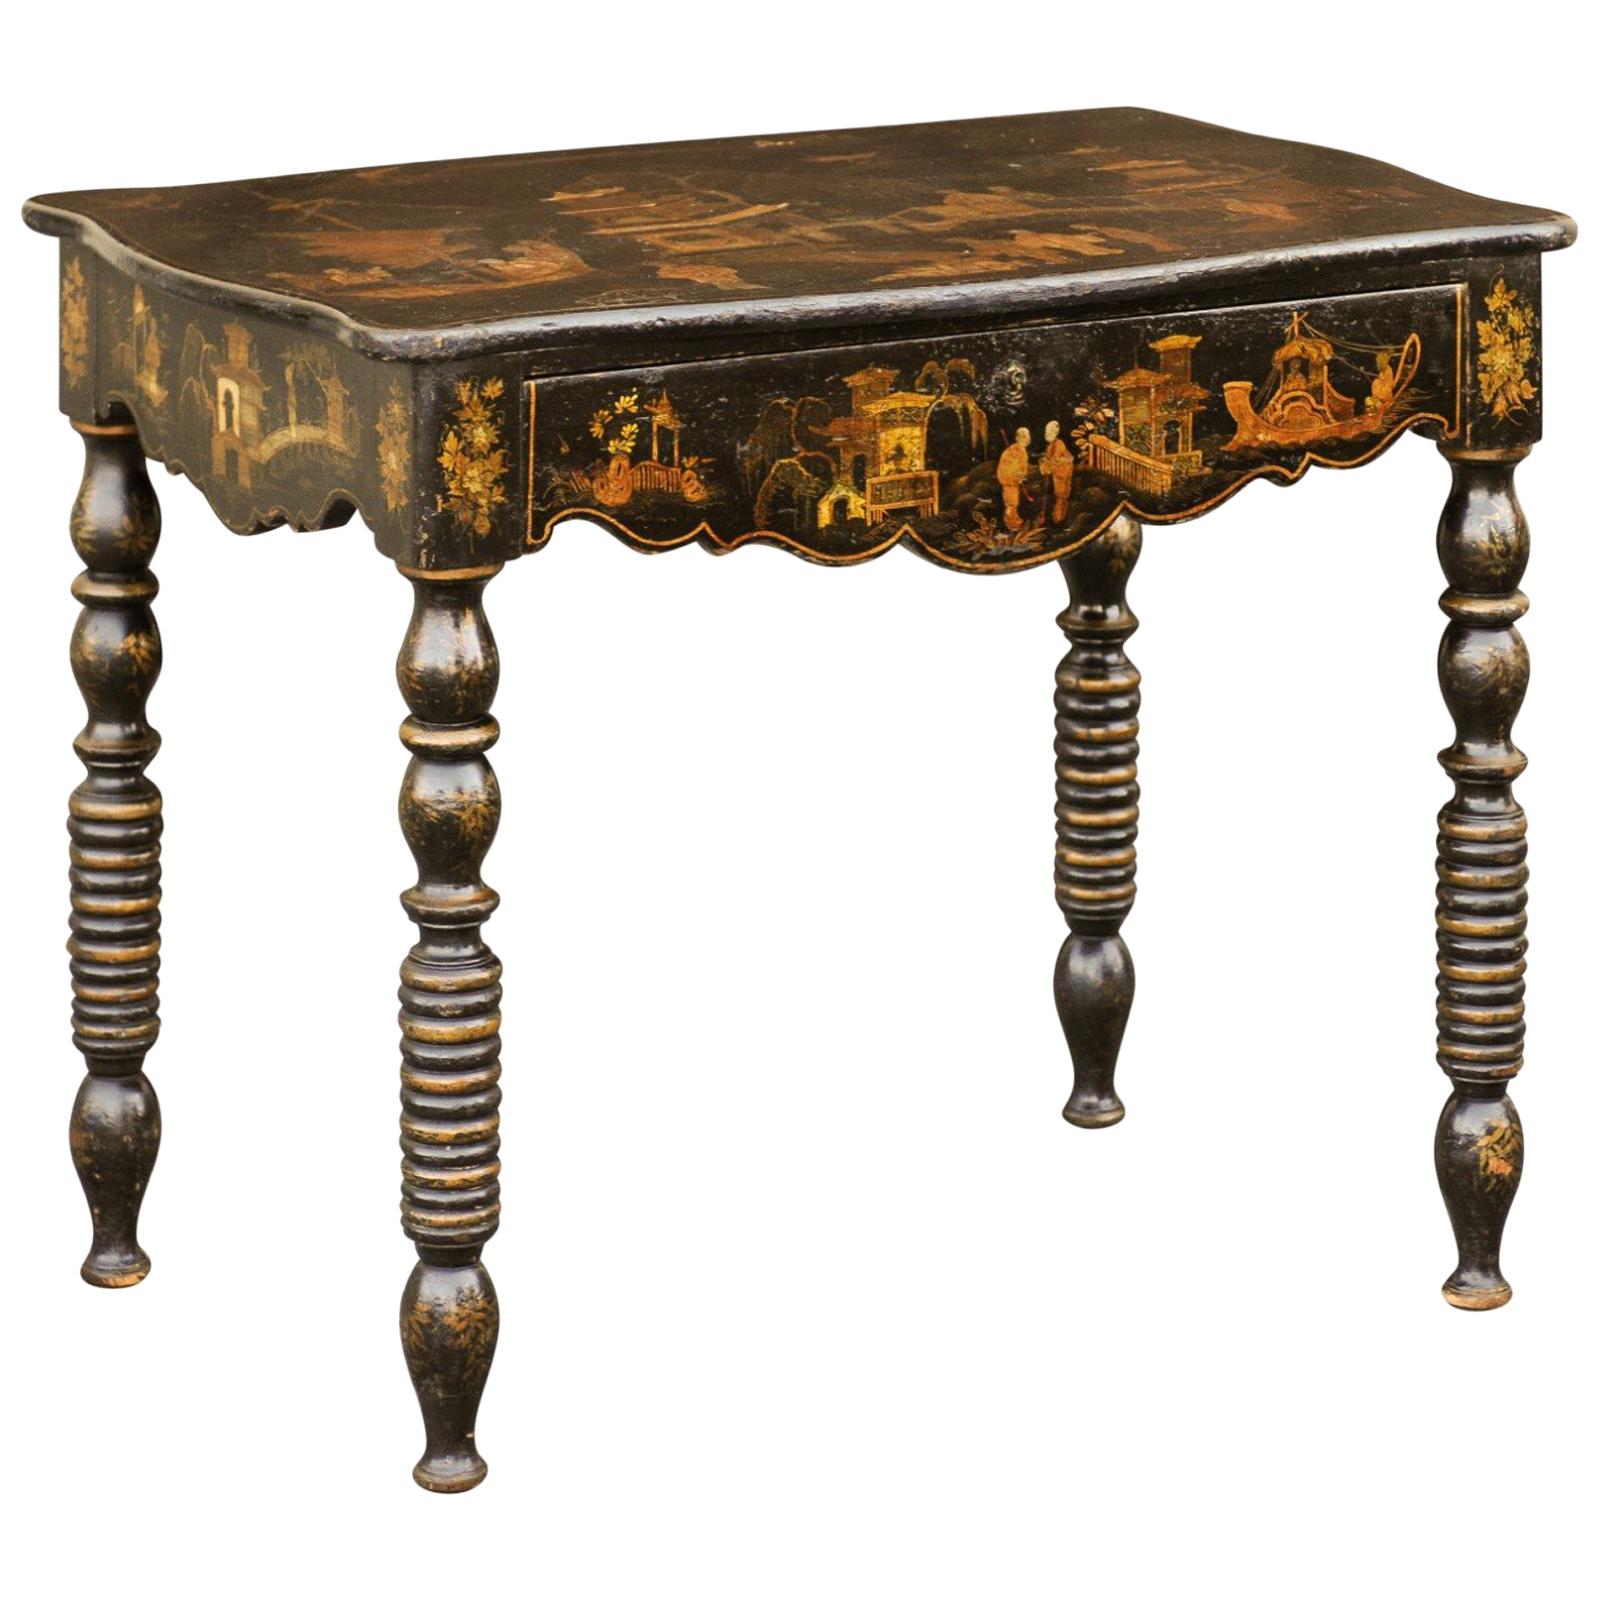 English 1850s Chinoiserie Table with Ebonized Wood and Hand Painted Décor